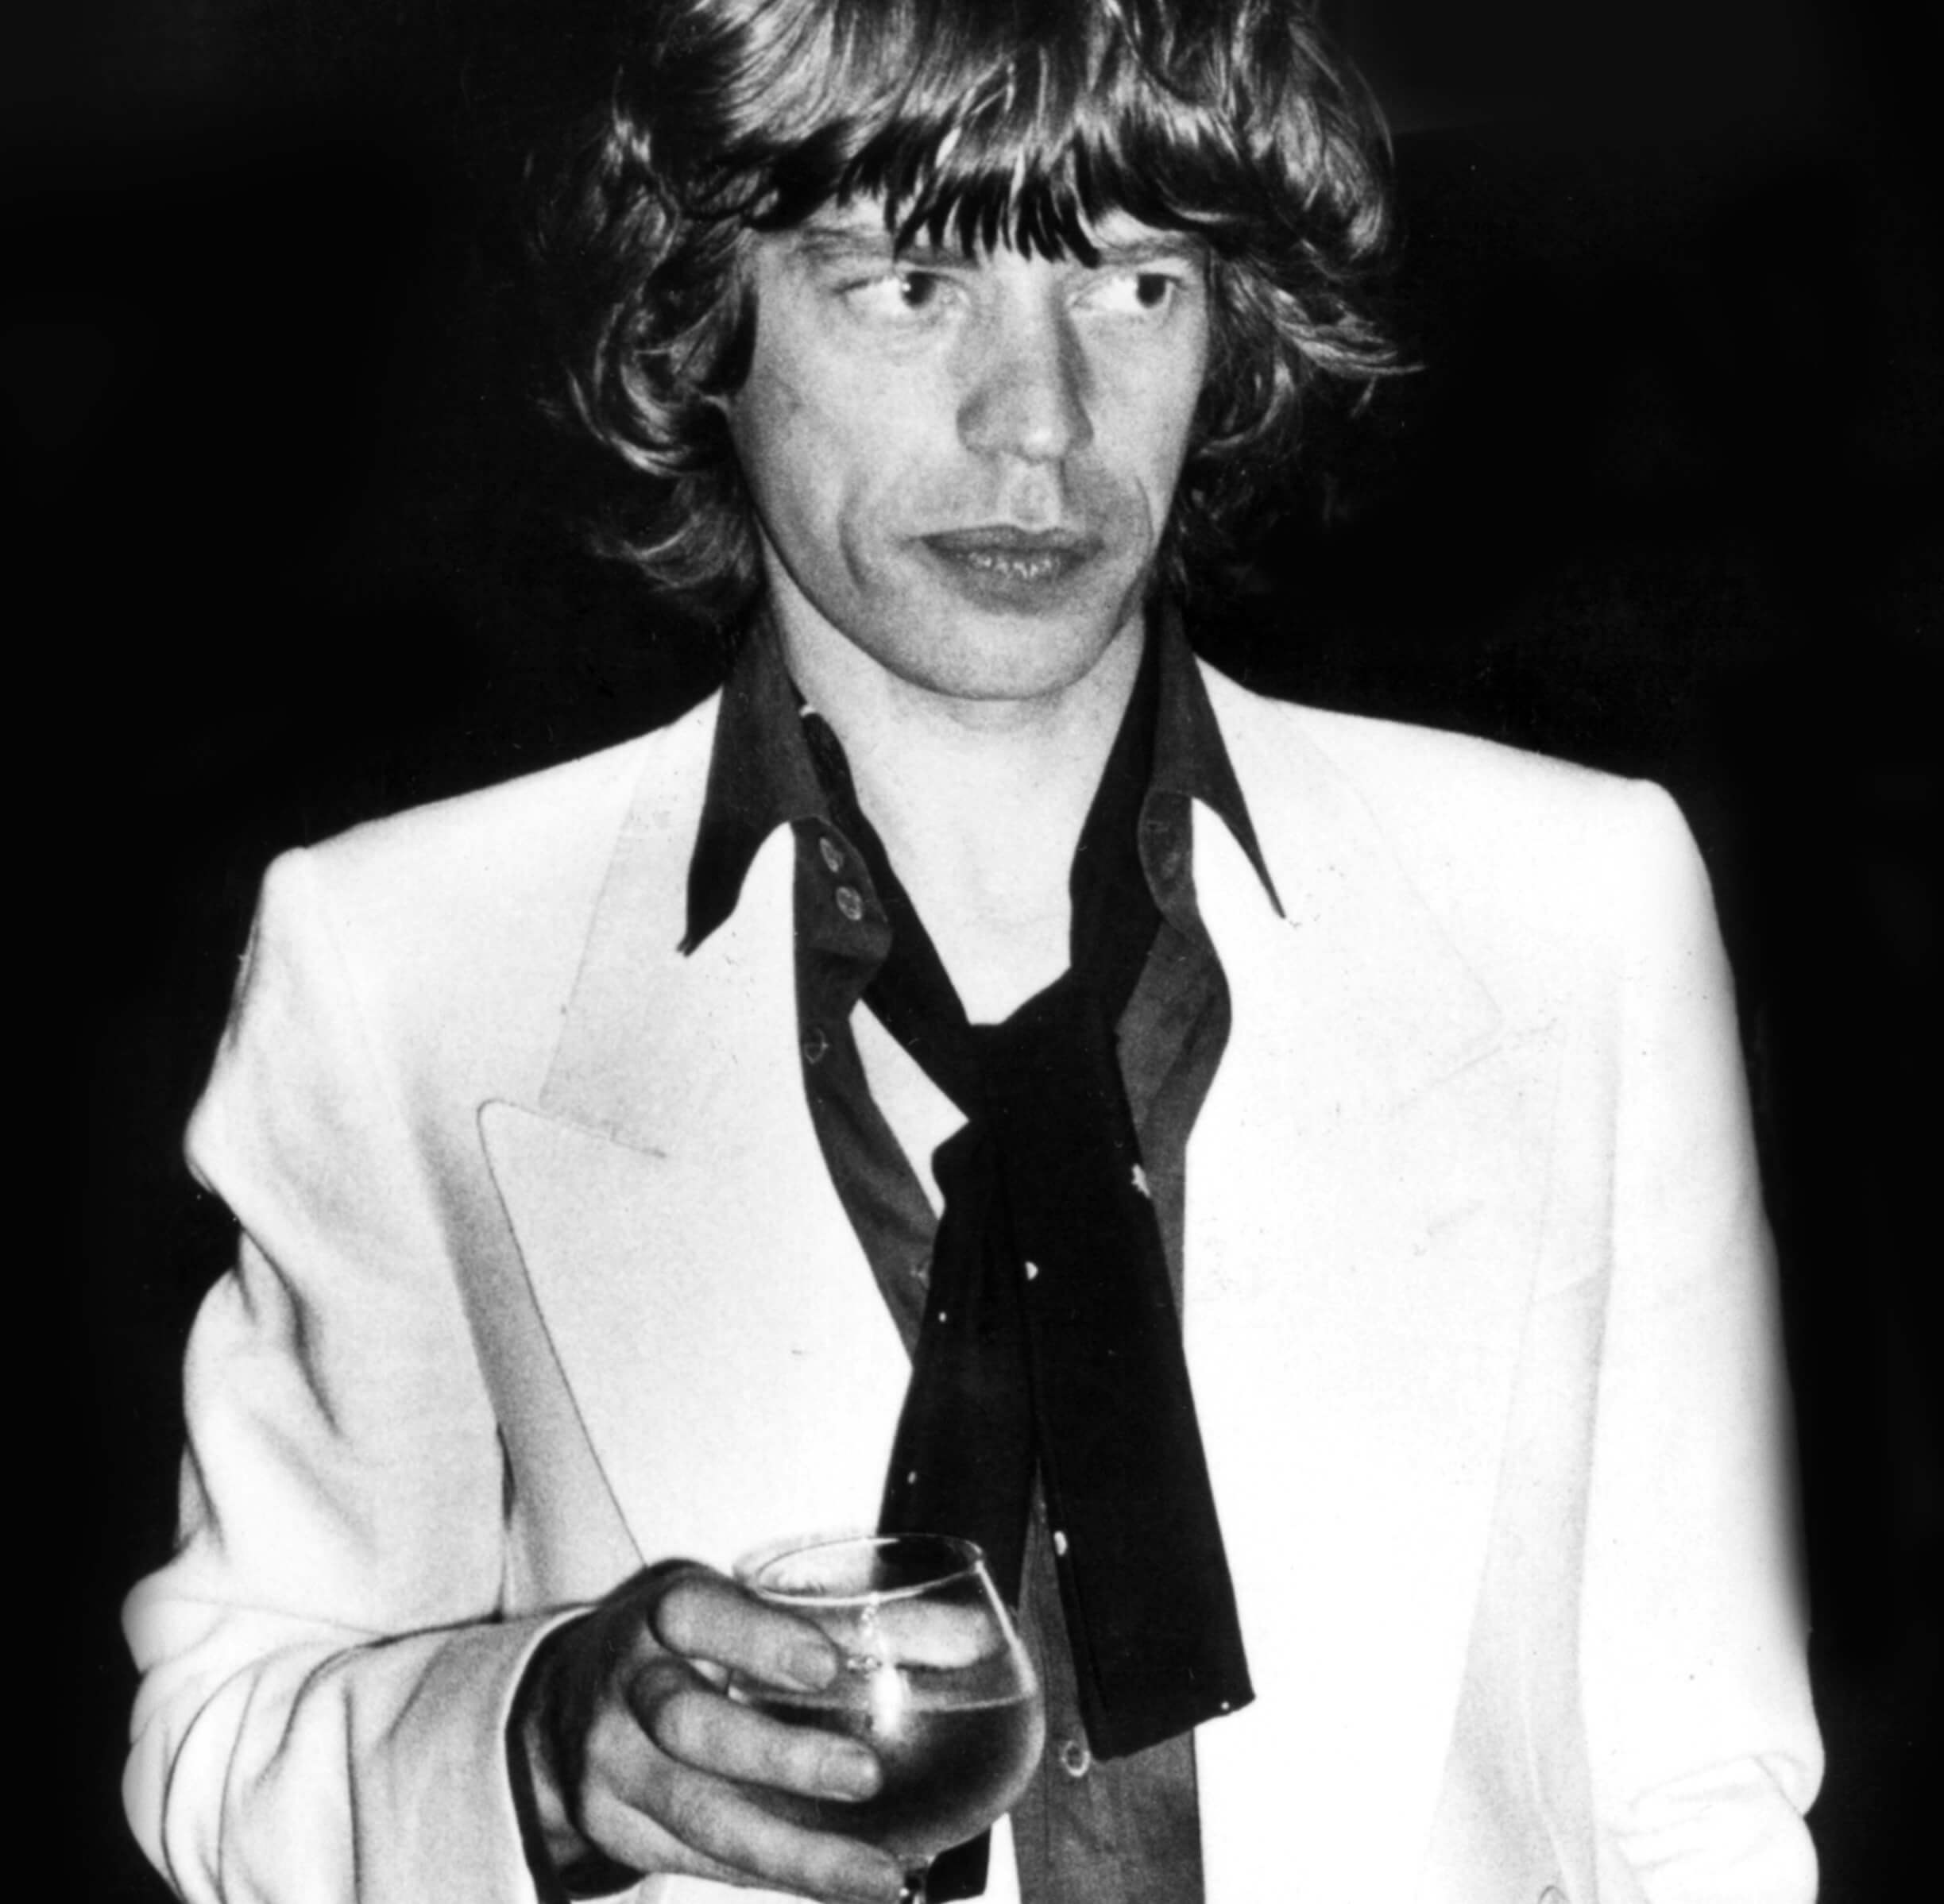 The Rolling Stones' Mick Jagger in a suit